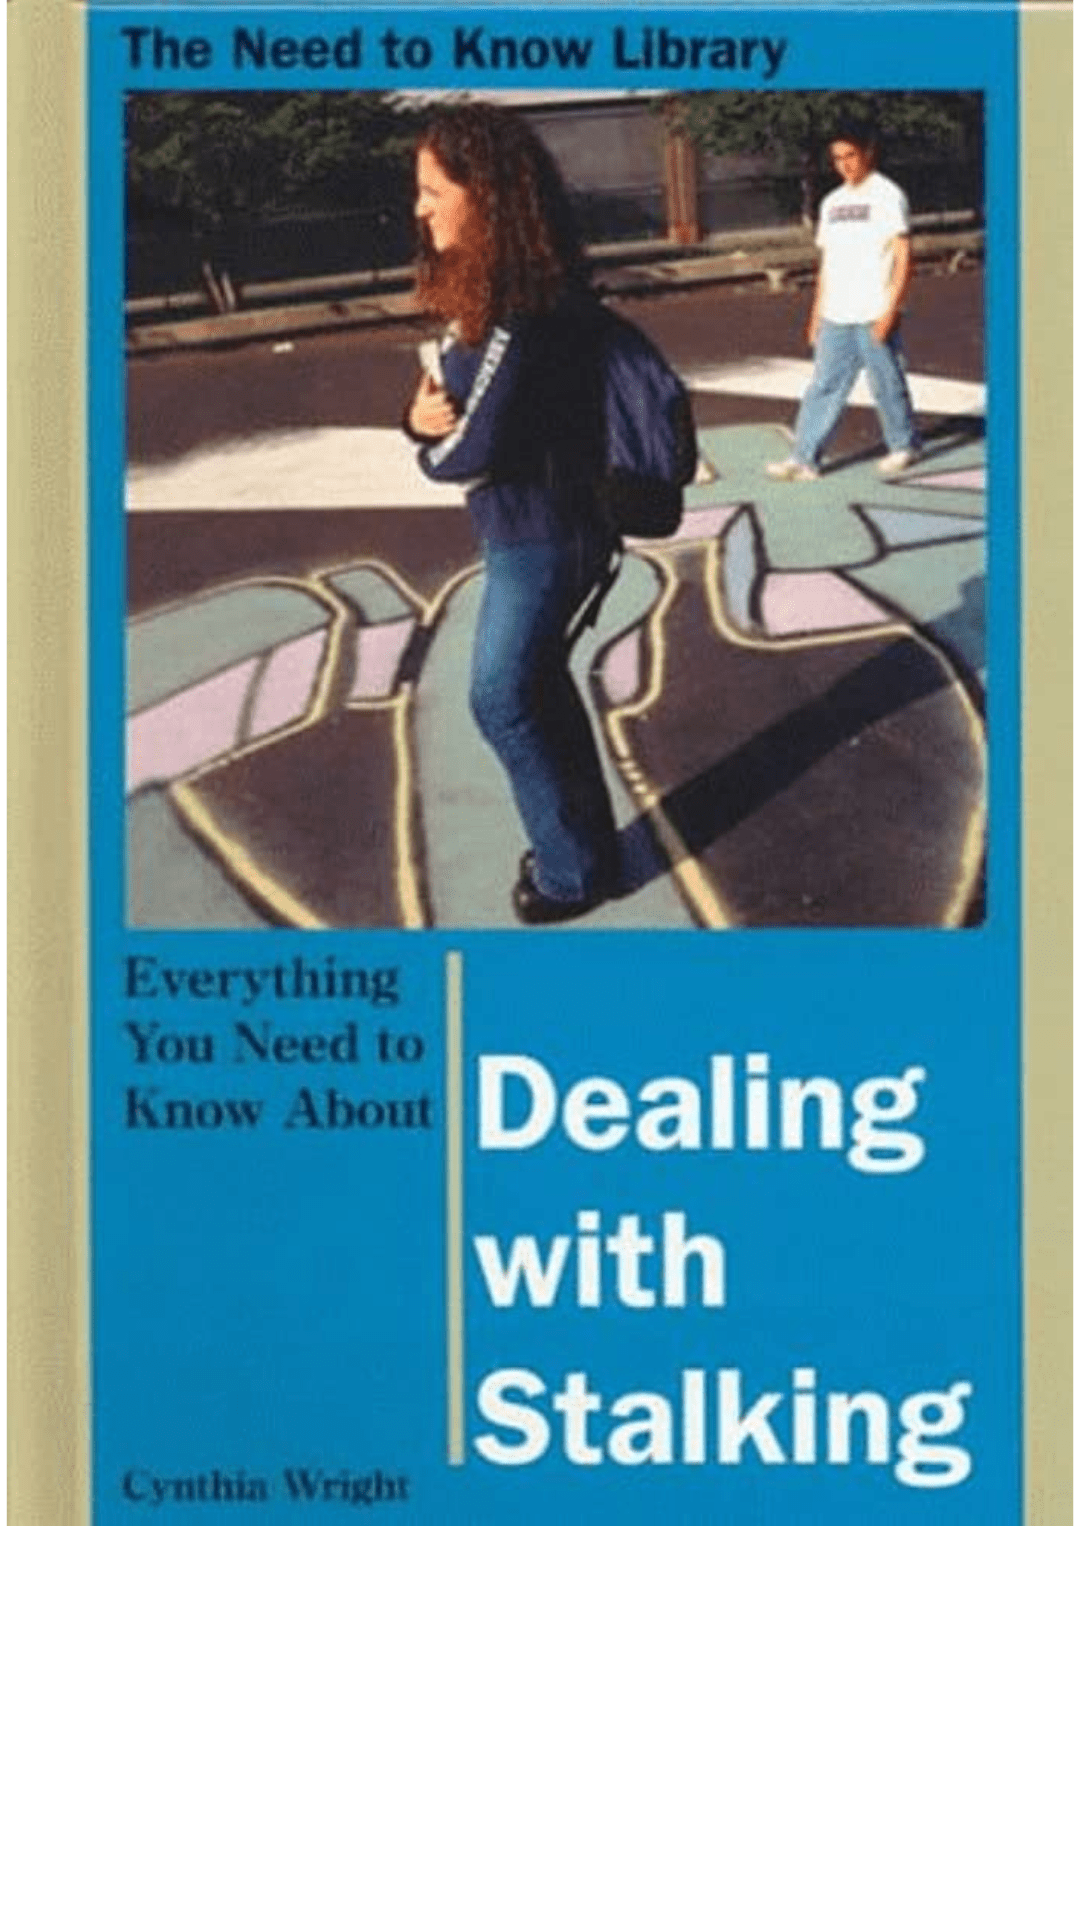 Everything You Need to Know about Dealing with Stalking